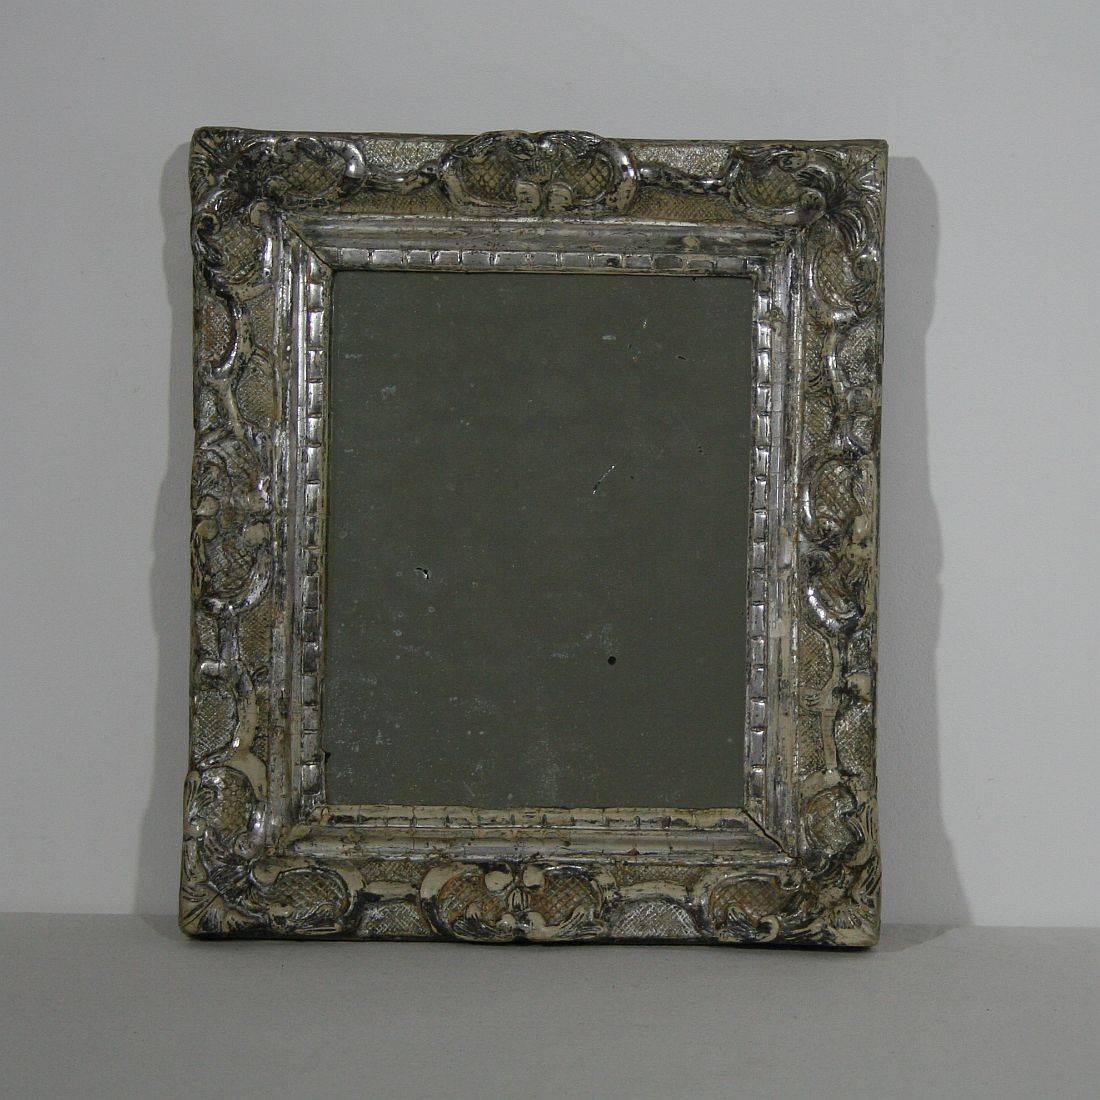 Great mirror with its original silver
France, circa 1750
weathered, small losses.